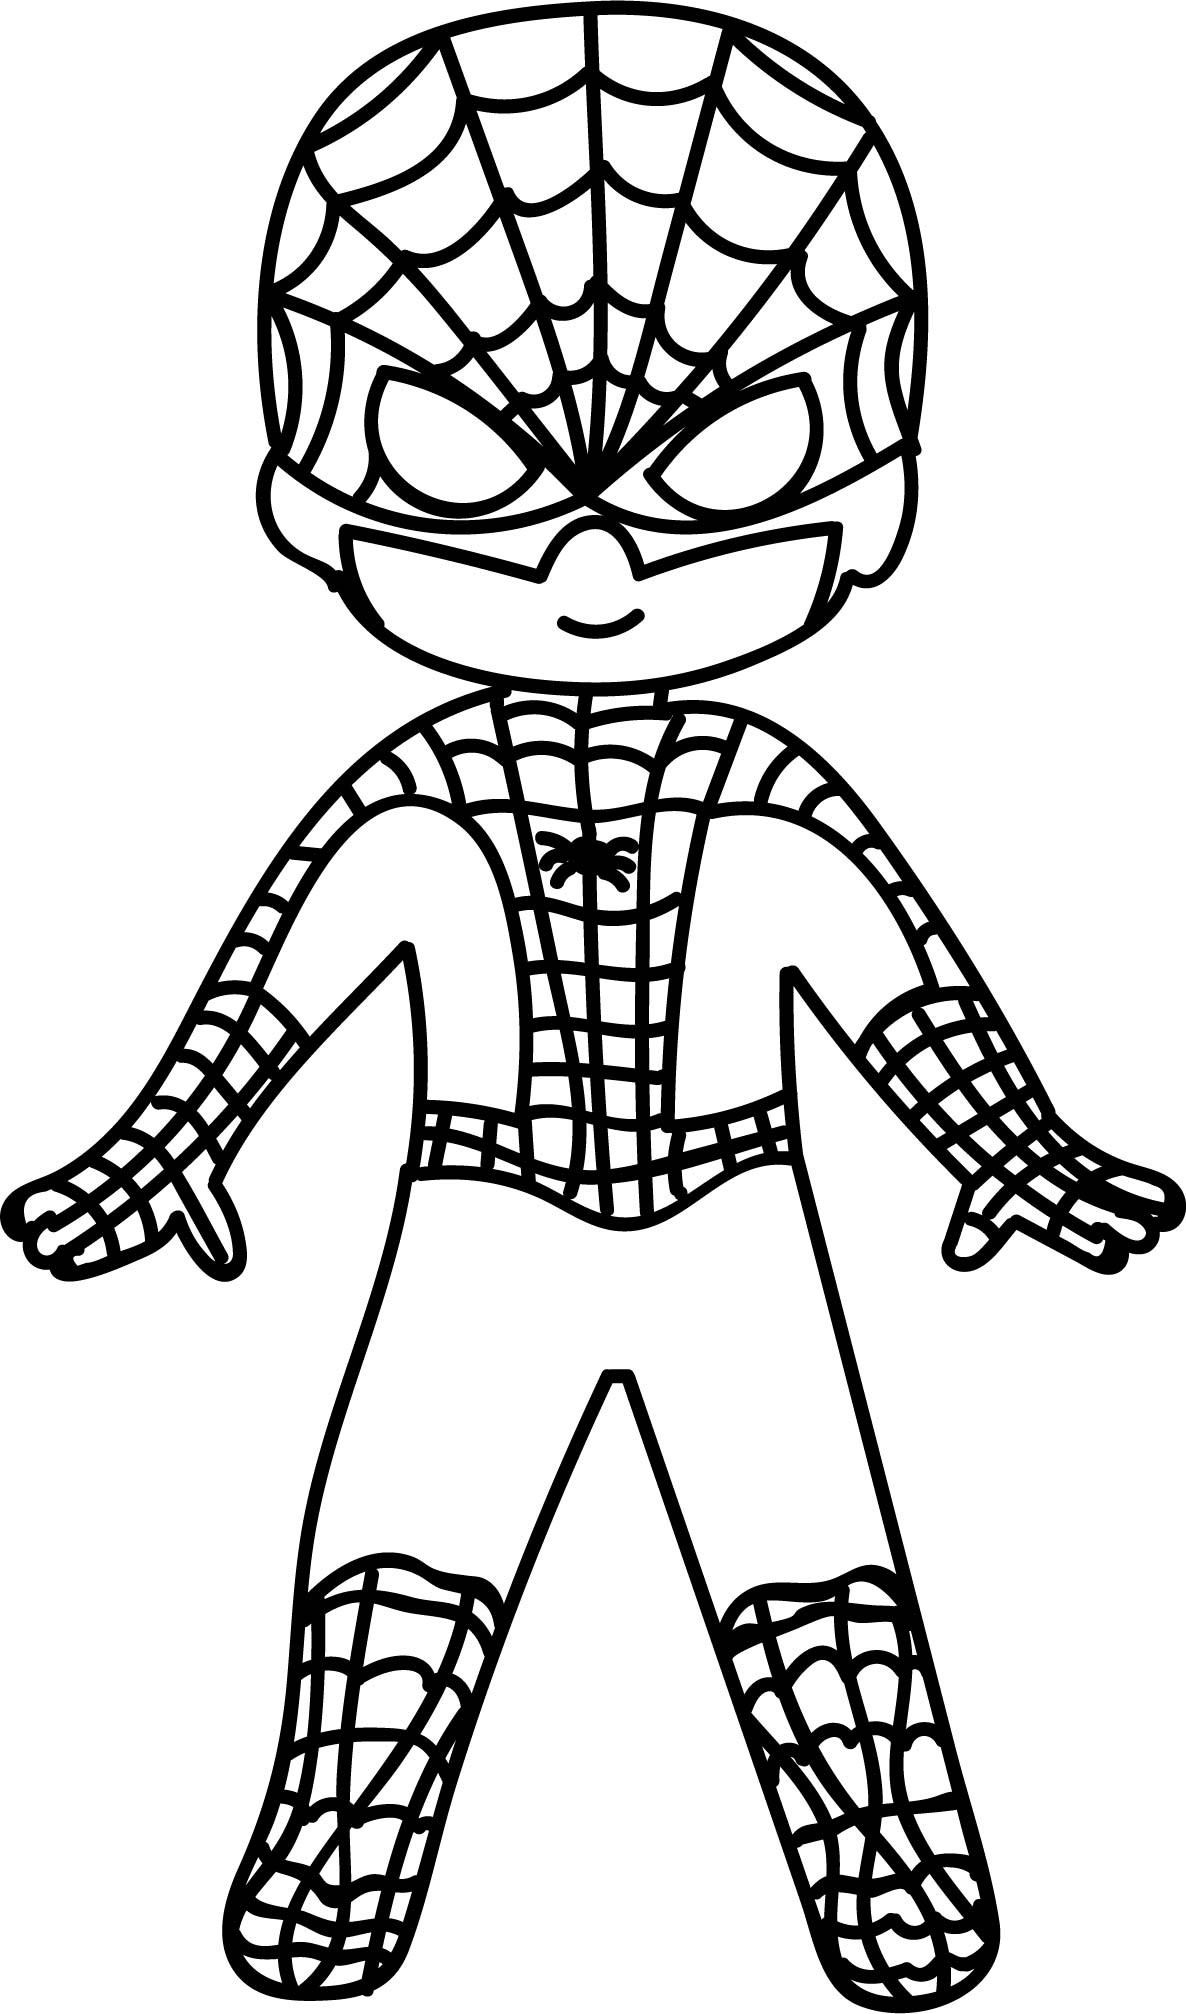 The 21 Best Ideas for Spiderman Coloring Pages for Kids Home Family